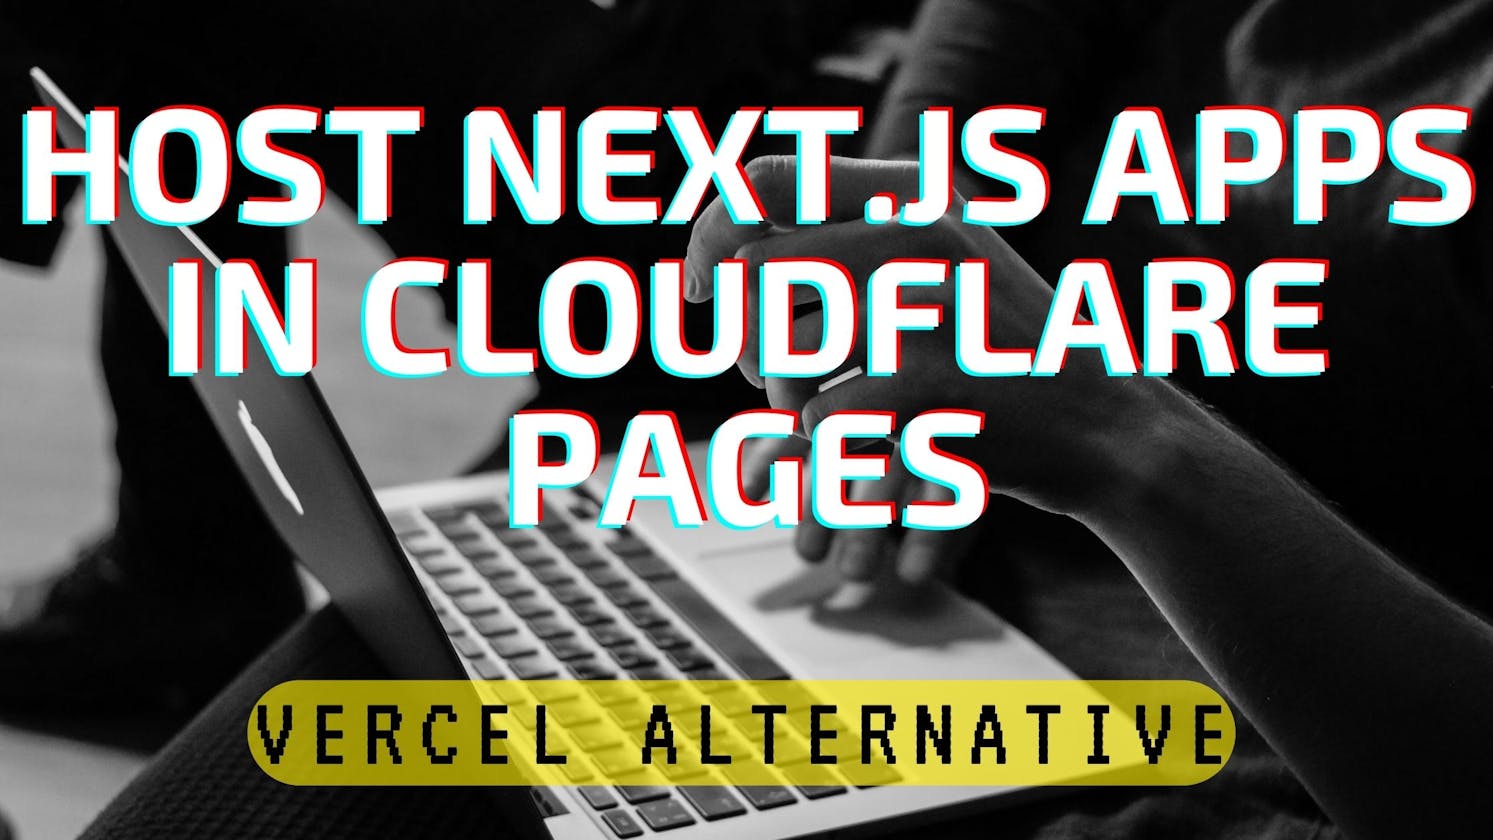 Deploy Next js apps in Cloudflare pages